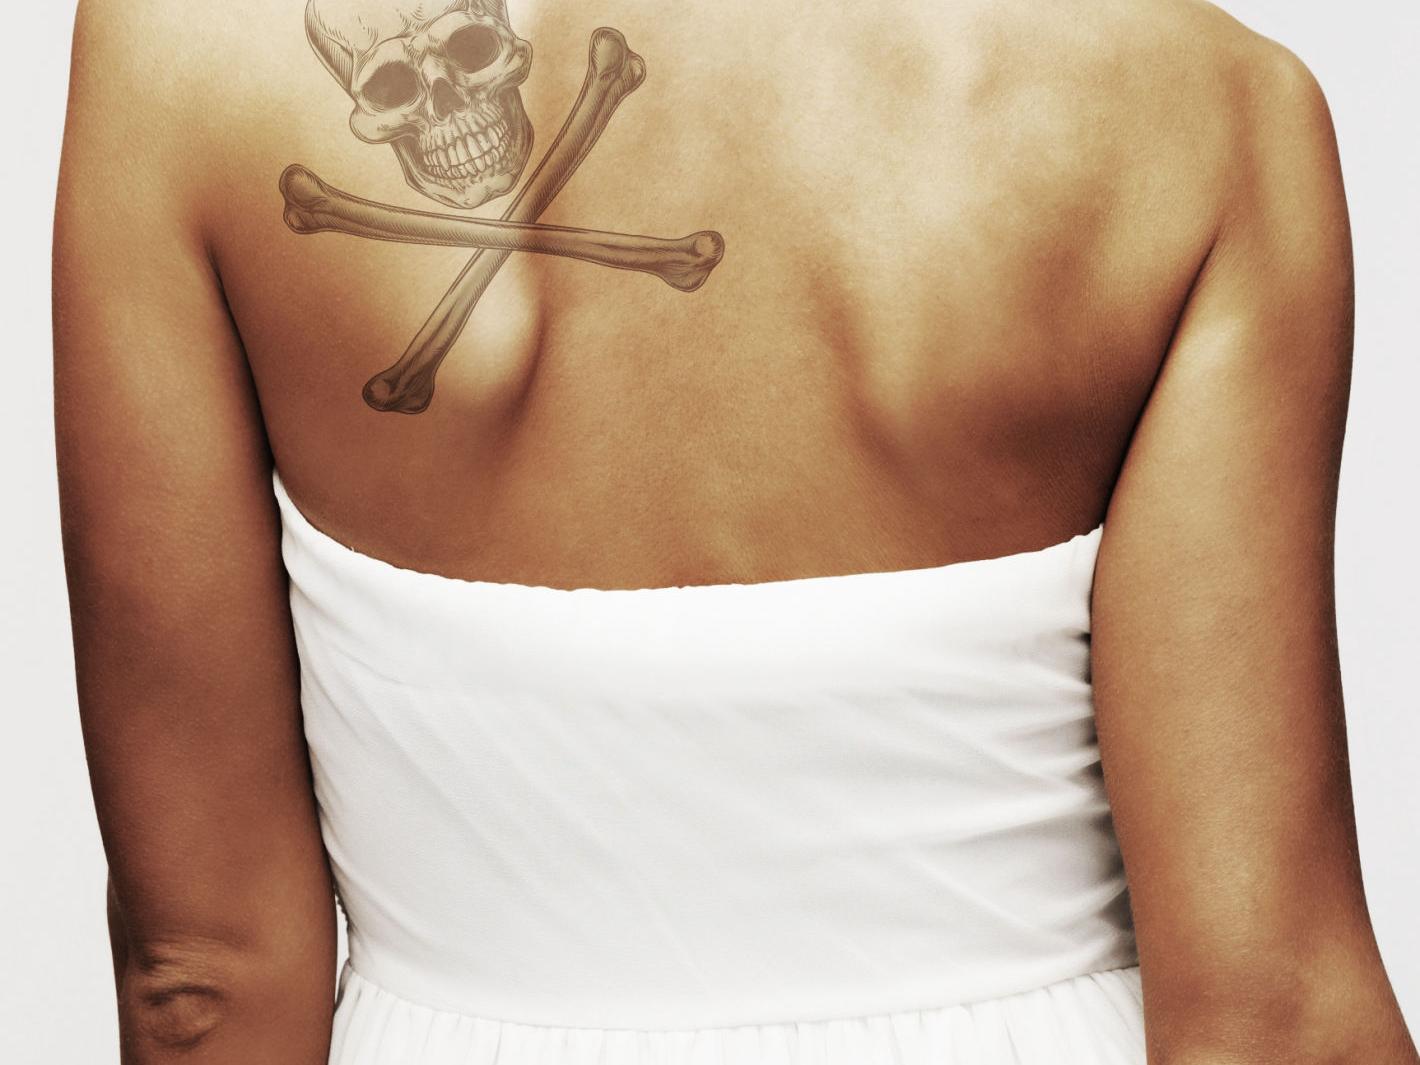 Tattoo health risks: Why you should think before you ink | Health |  